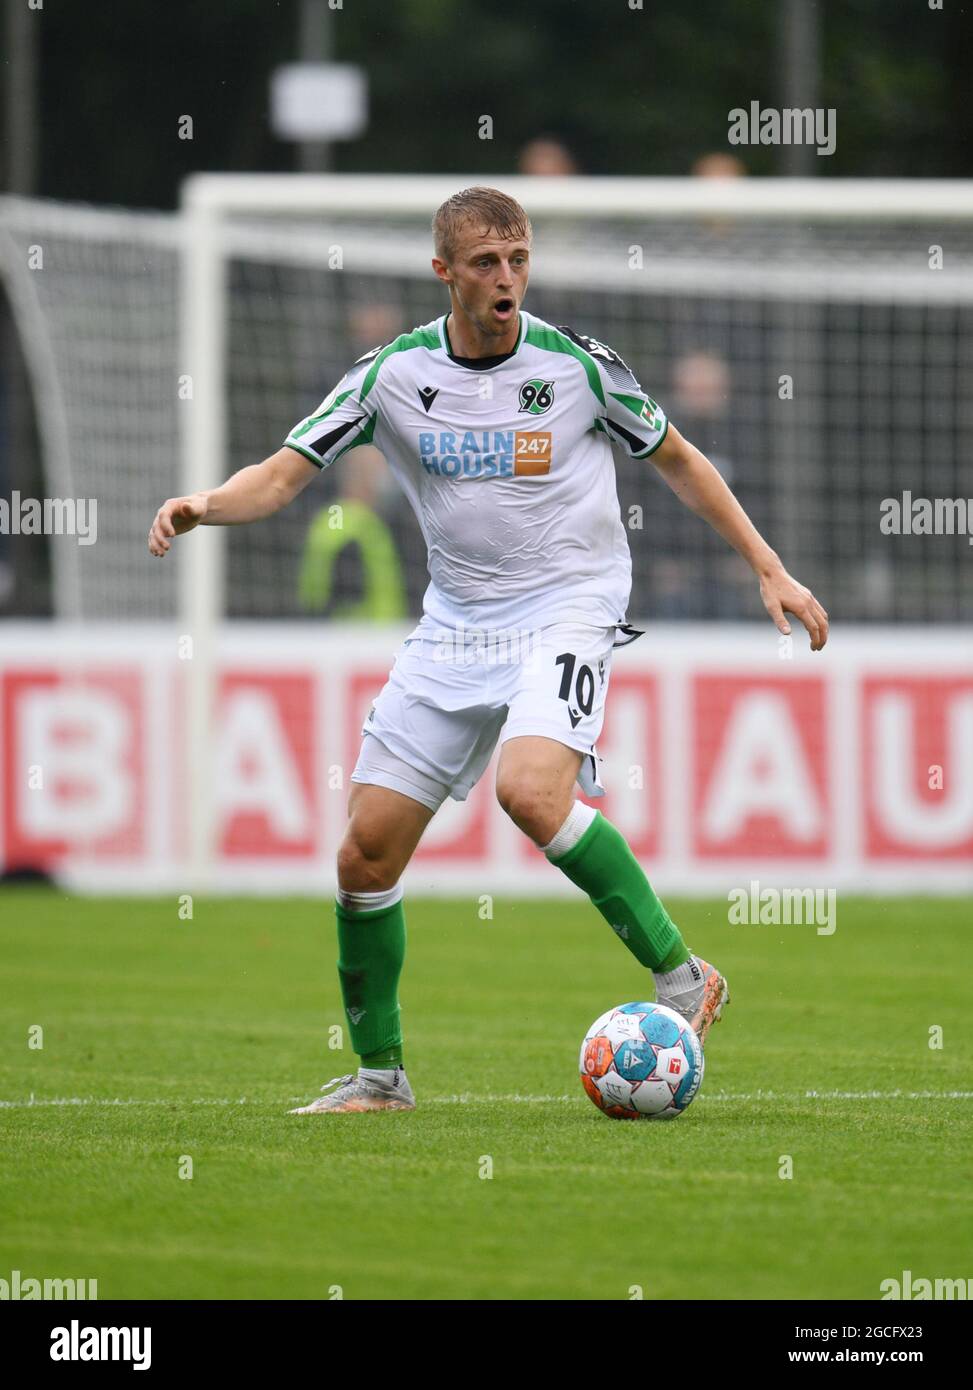 Norderstedt, Germany. 07th Aug, 2021. Football: DFB Cup, Eintracht Norderstedt - Hannover 96, 1st round at Edmund-Plambeck-Stadion. Hannover's Sebastian Ernst plays the ball. Credit: Daniel Reinhardt/dpa - IMPORTANT NOTE: In accordance with the regulations of the DFL Deutsche Fußball Liga and/or the DFB Deutscher Fußball-Bund, it is prohibited to use or have used photographs taken in the stadium and/or of the match in the form of sequence pictures and/or video-like photo series./dpa/Alamy Live News Stock Photo